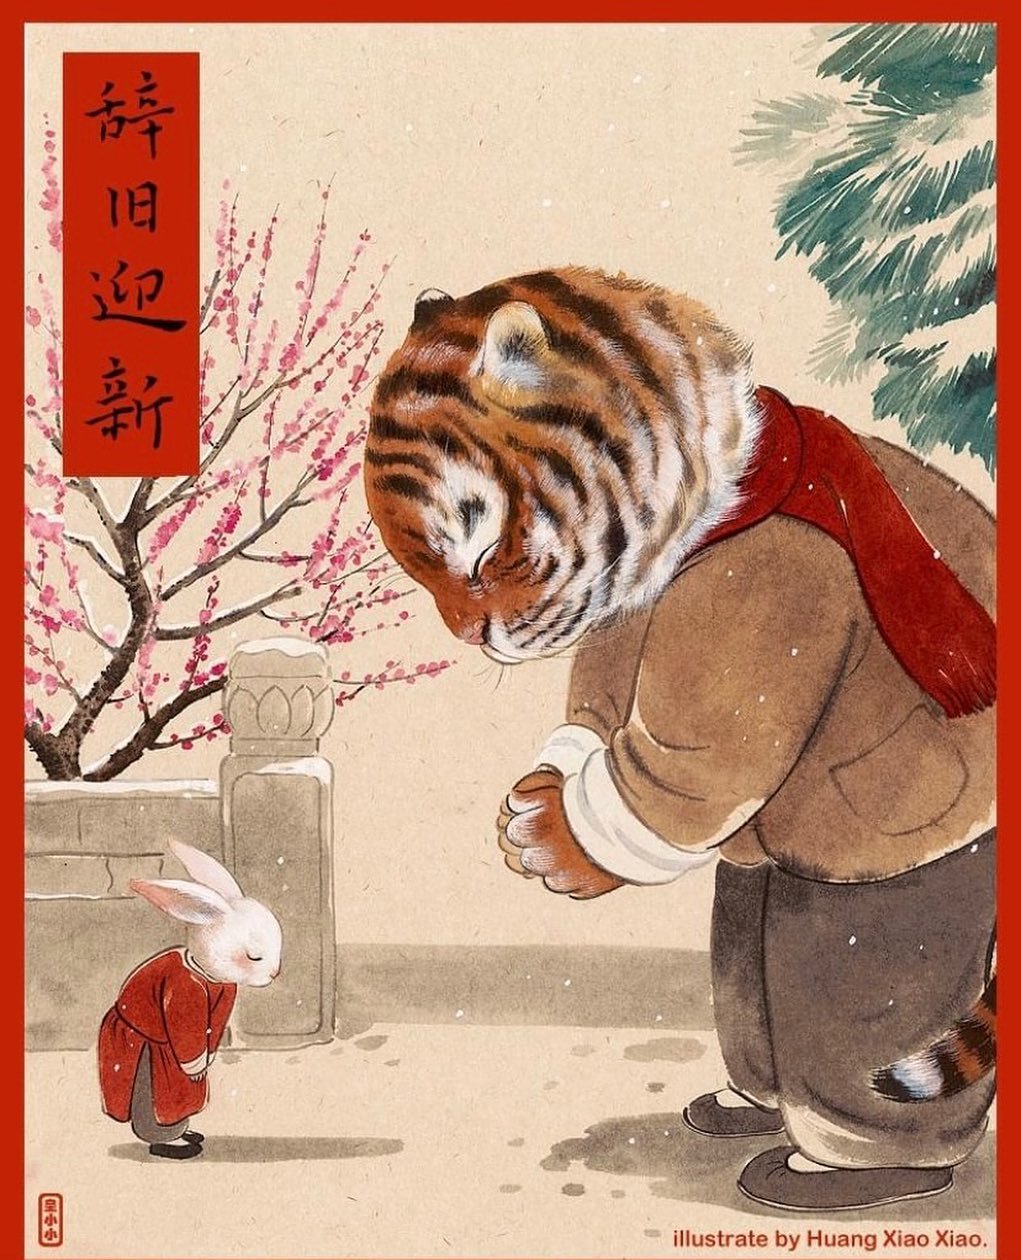 Time to say goodbye to the year of the tiger and get ready for a fresh start #yearoftherabbit